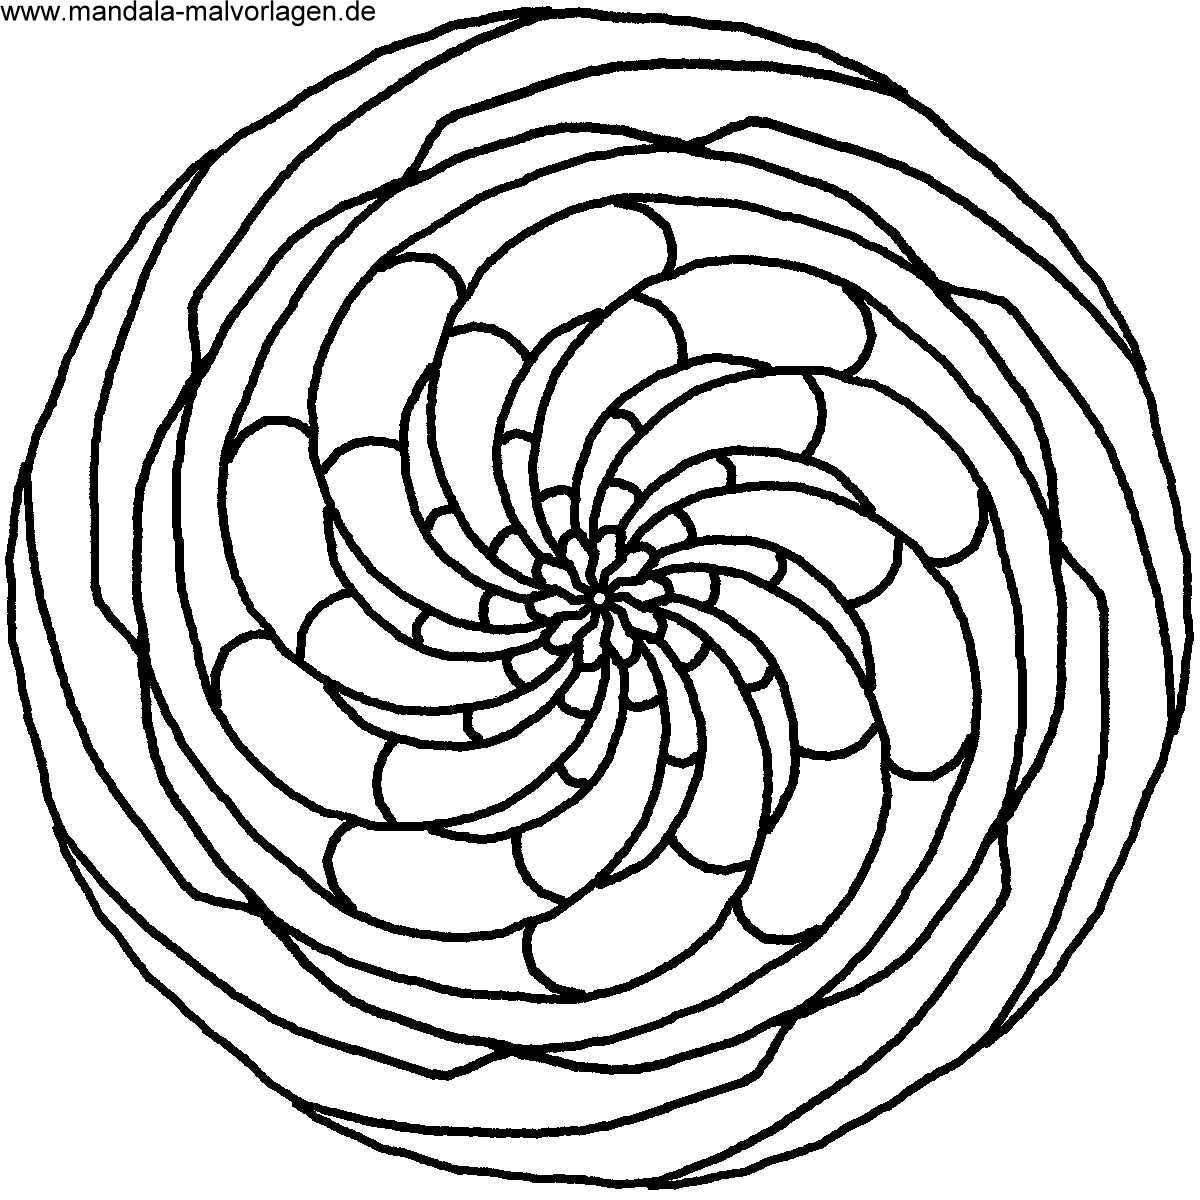 Fascinating coloring spiral unpainted